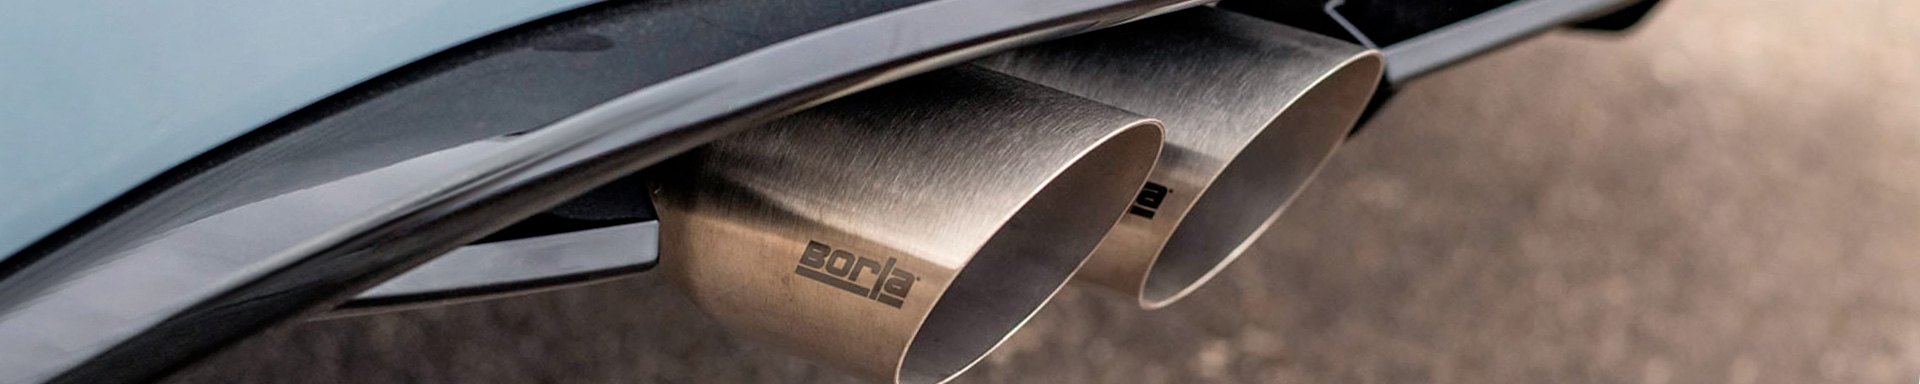 Borla Introduced New Quad Cat-Back Exhaust System for 2018-2019 Volkswagen Golf